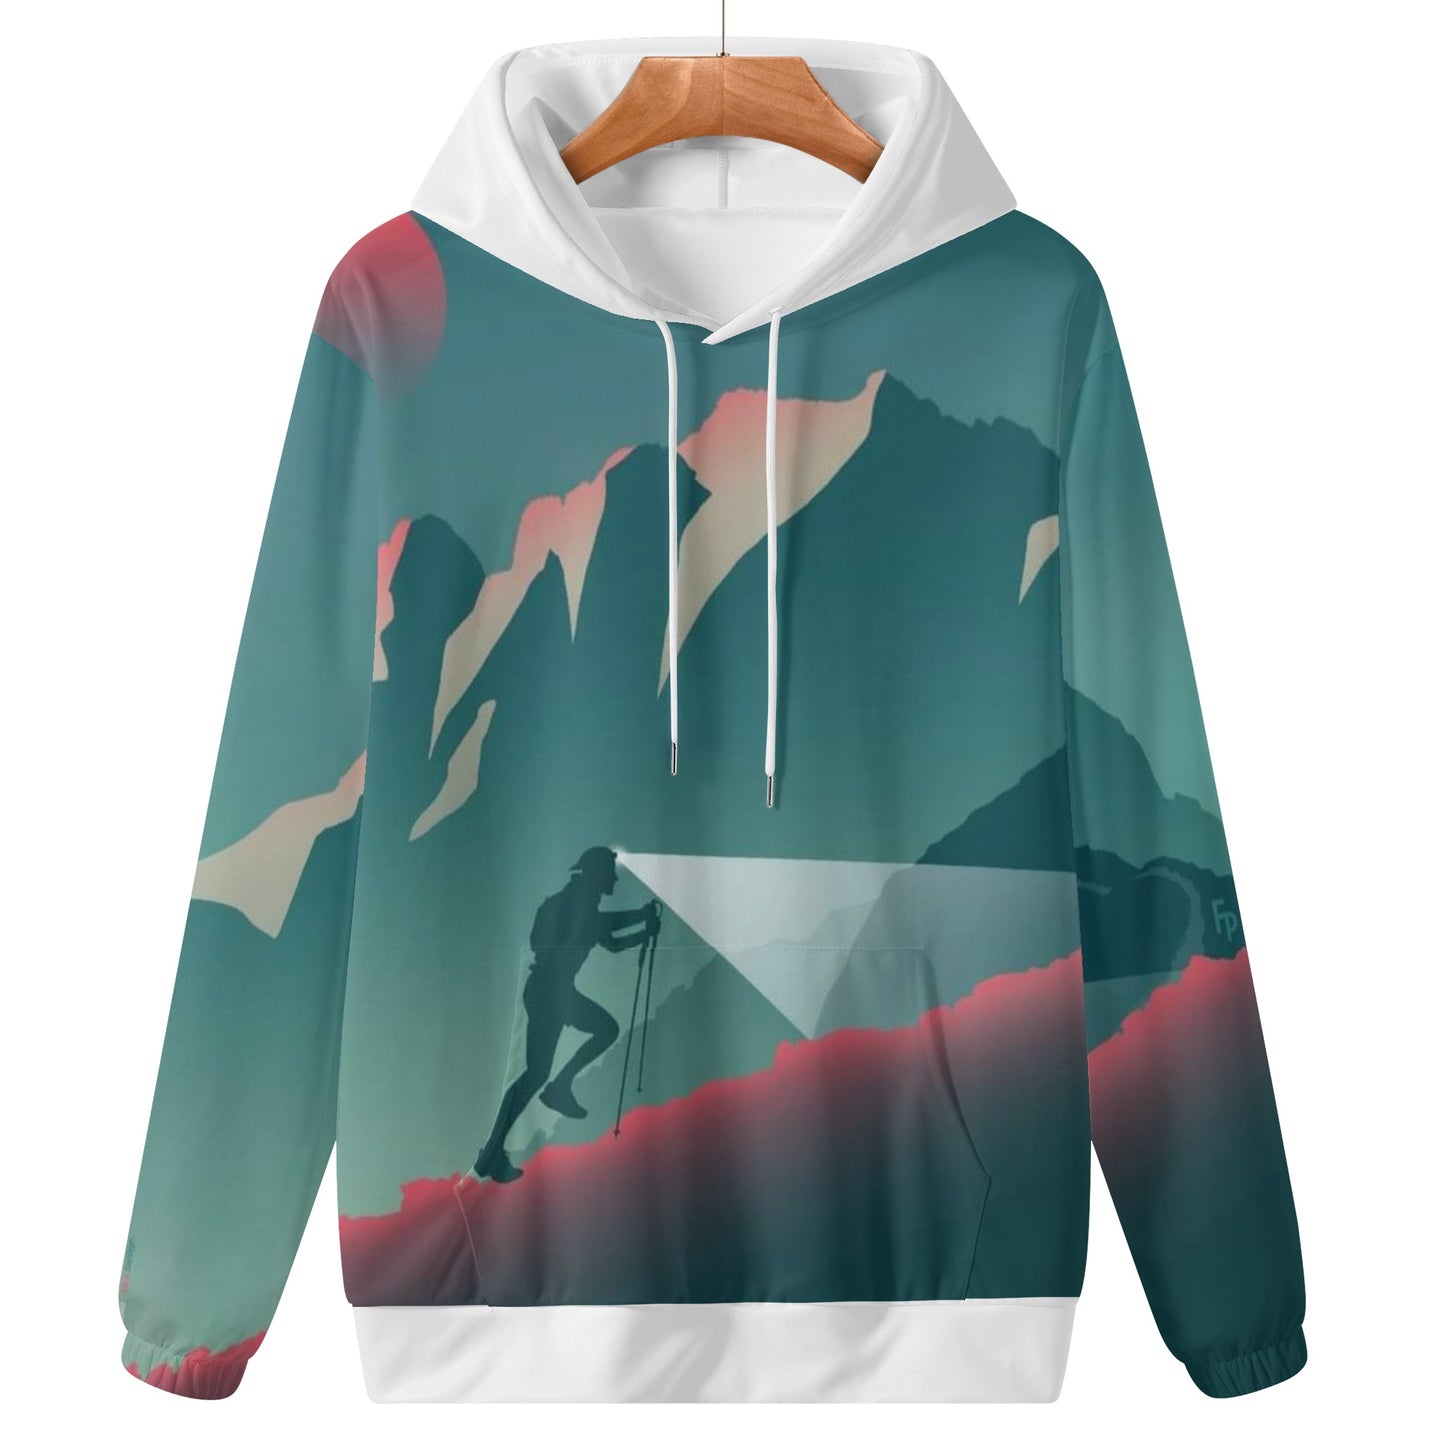 pure nature project Mens Lightweight All Over Printing Hoodie Sweatshirt